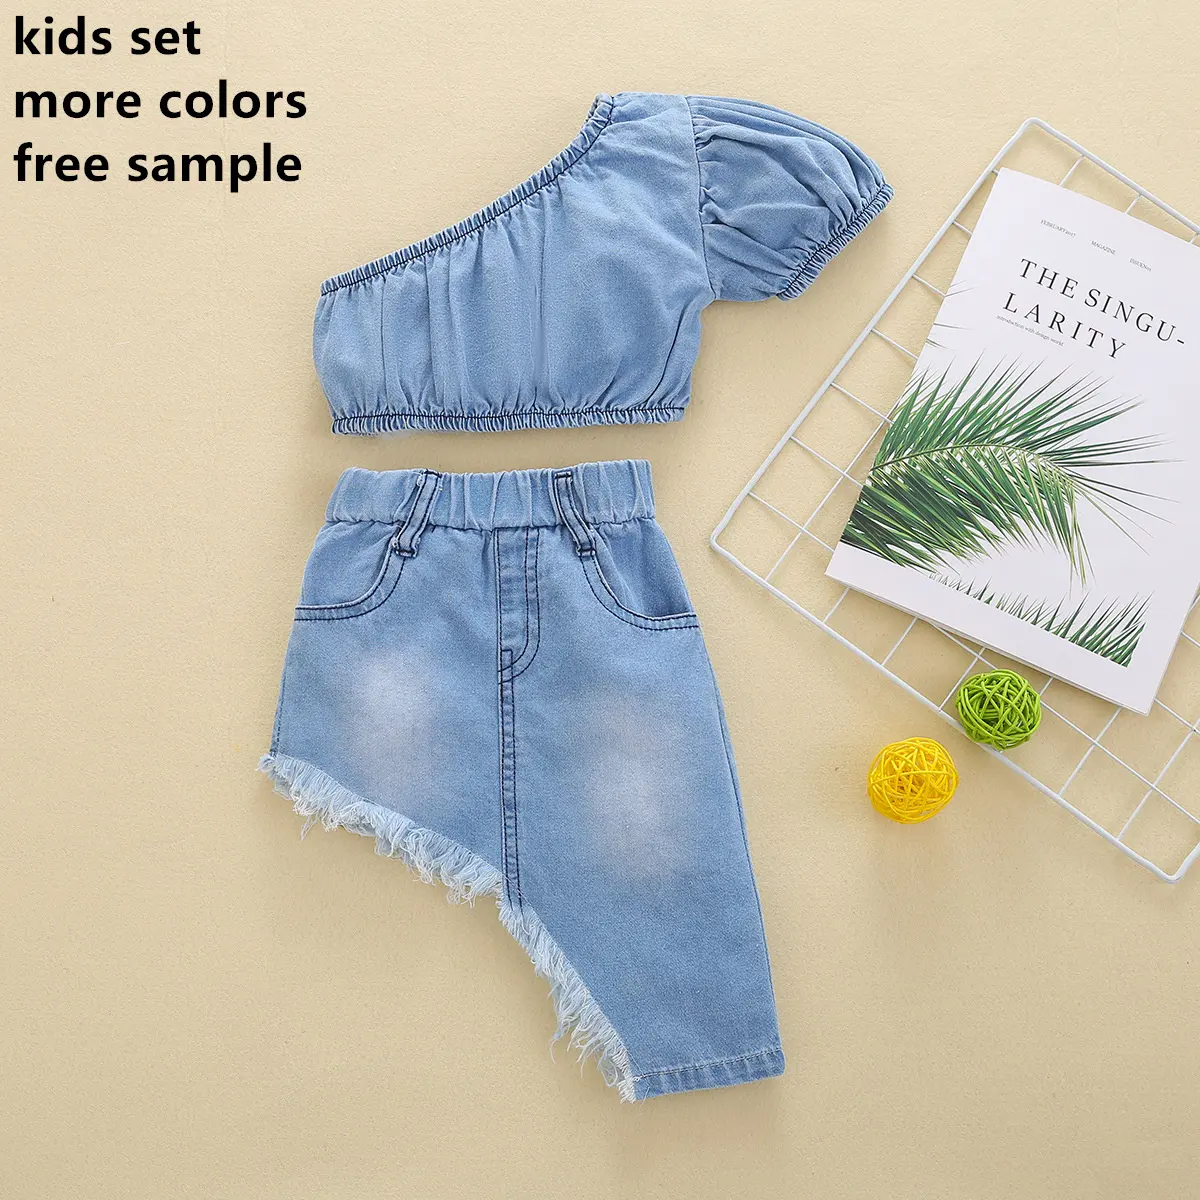 Summer Fashion wholesale 1 to 6 year old kids clothes 2pcs outfit solid blue cotton denim girl skirt clothing suit